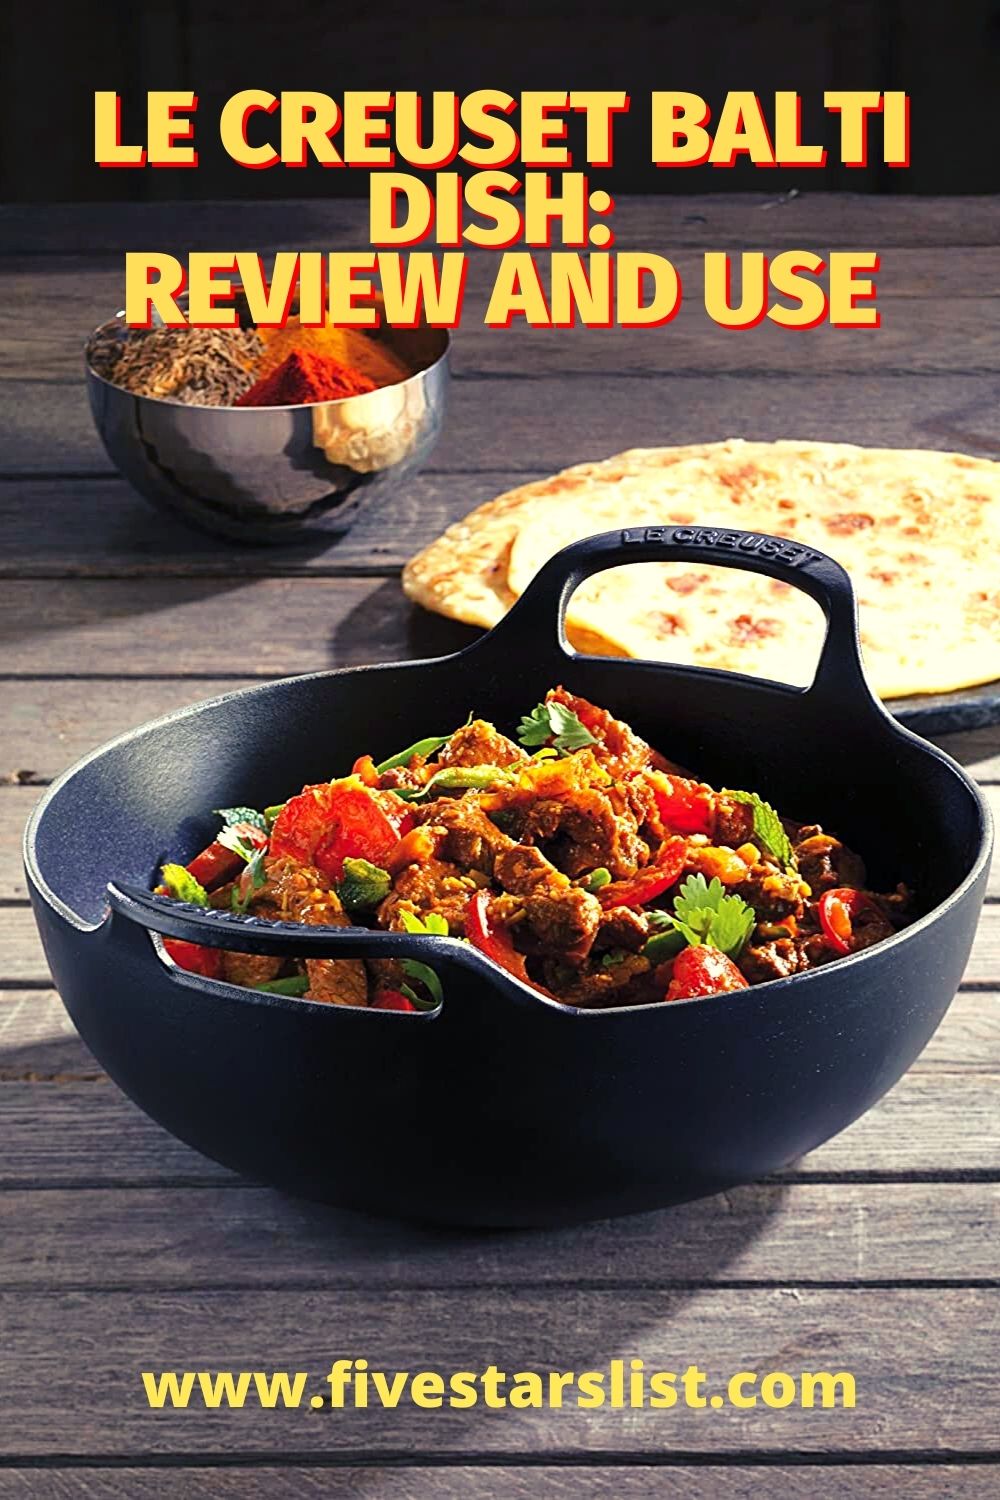 Le Creuset Balti Dish: Review and Use